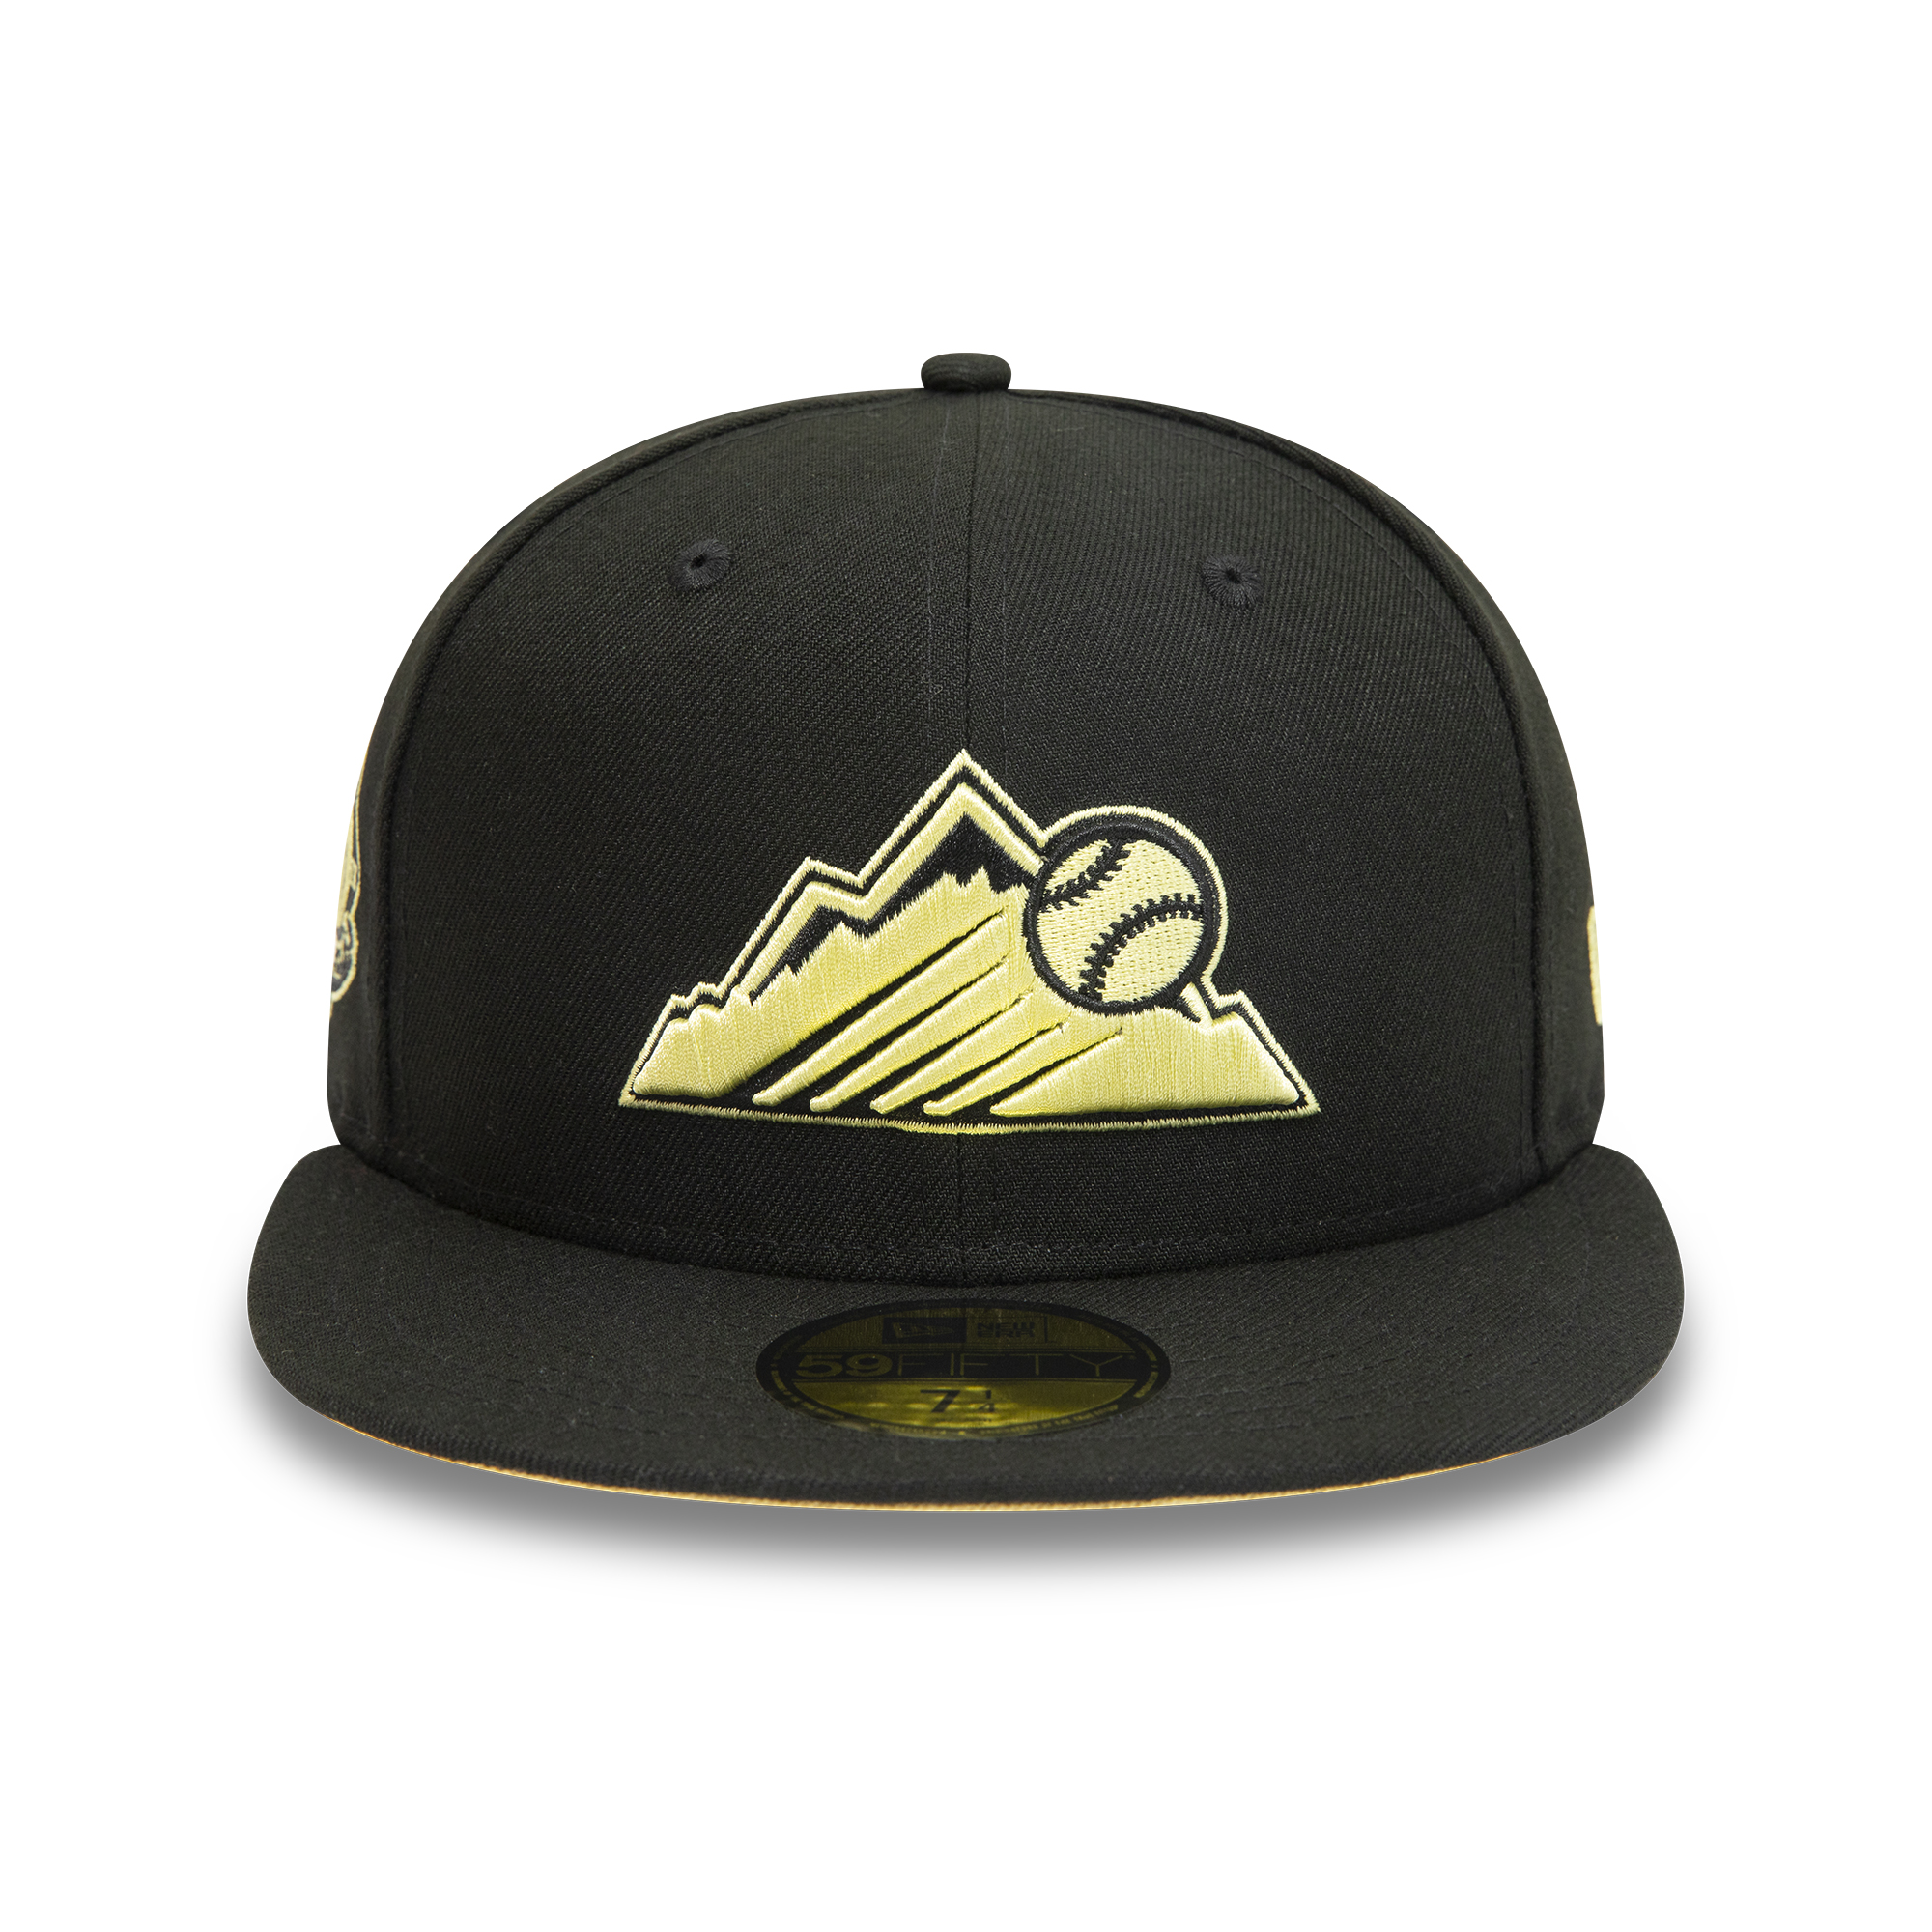 Colorado Rockies 20th Anniversary Black 59FIFTY Fitted Cap